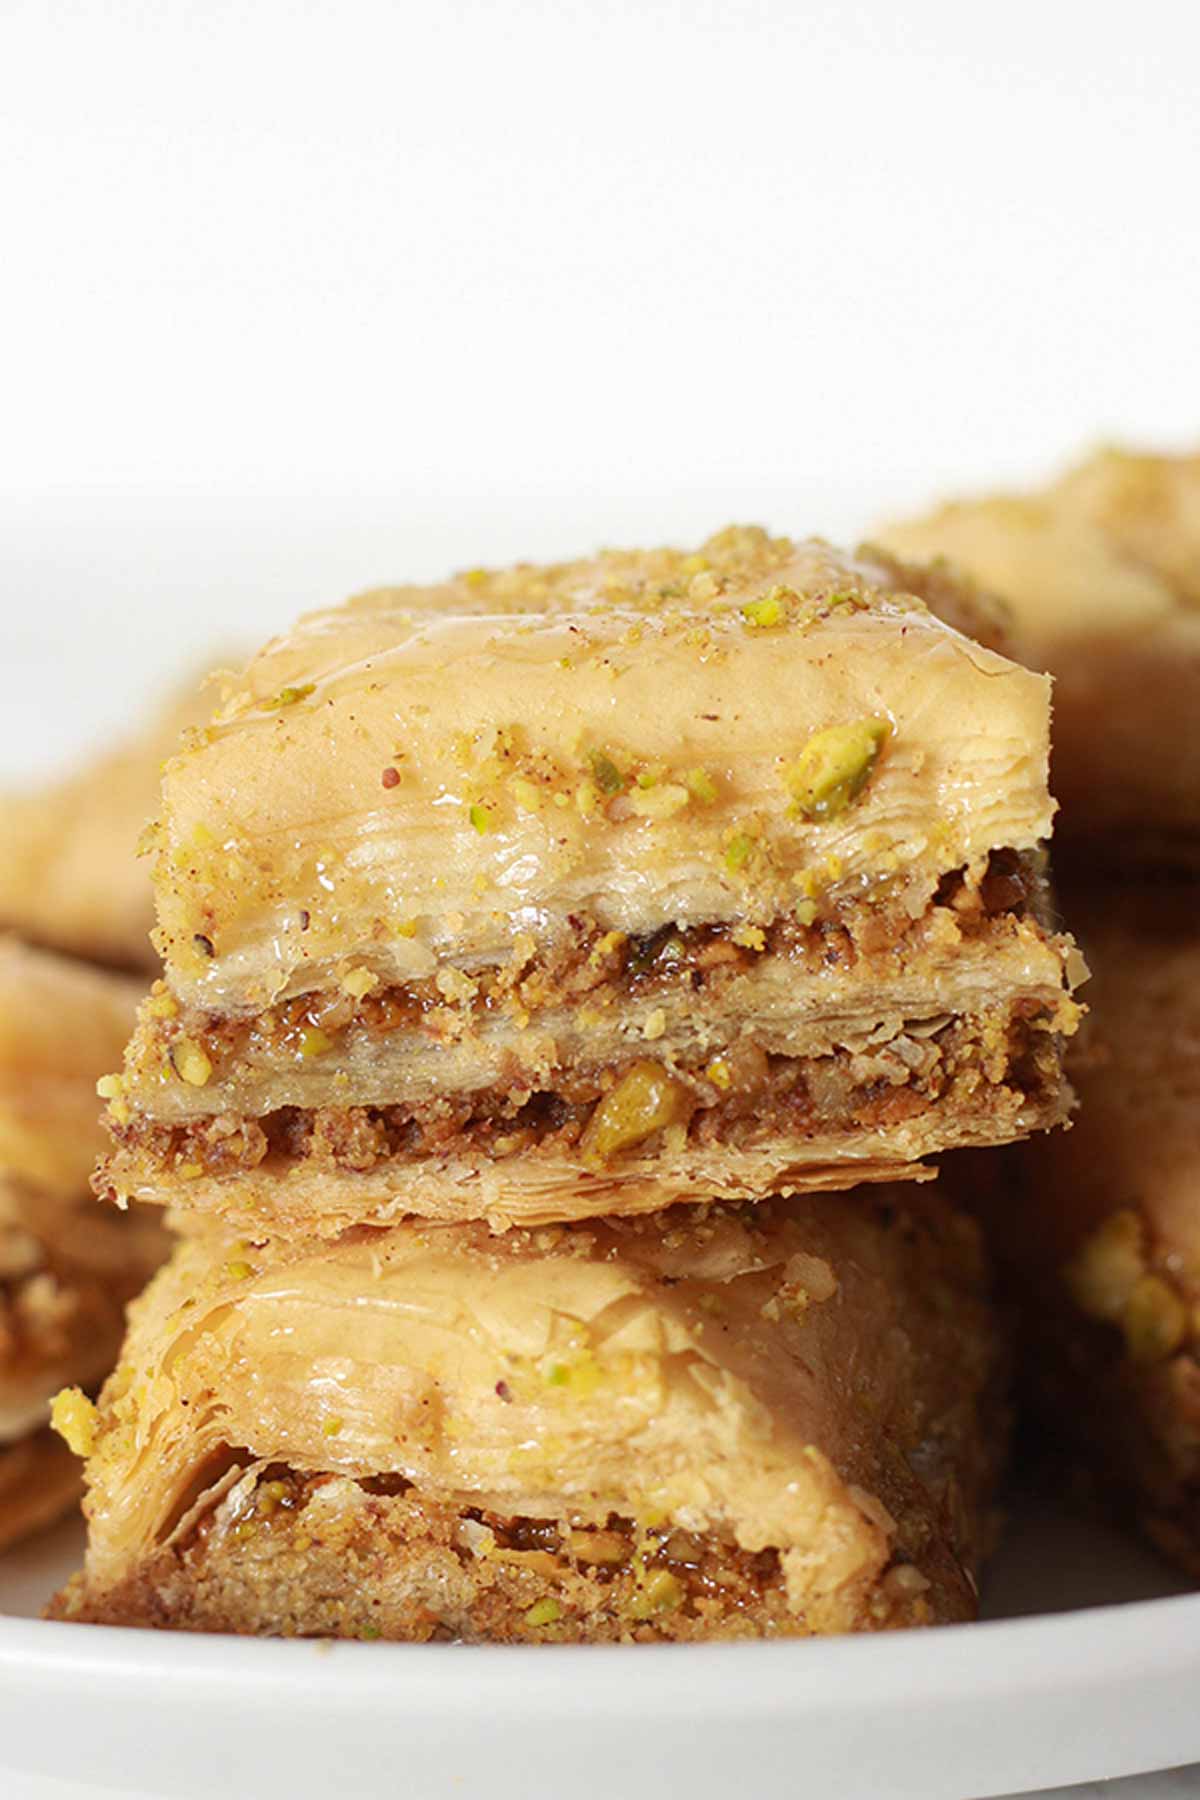 Stacked Slices Of Baklava On A White Plate